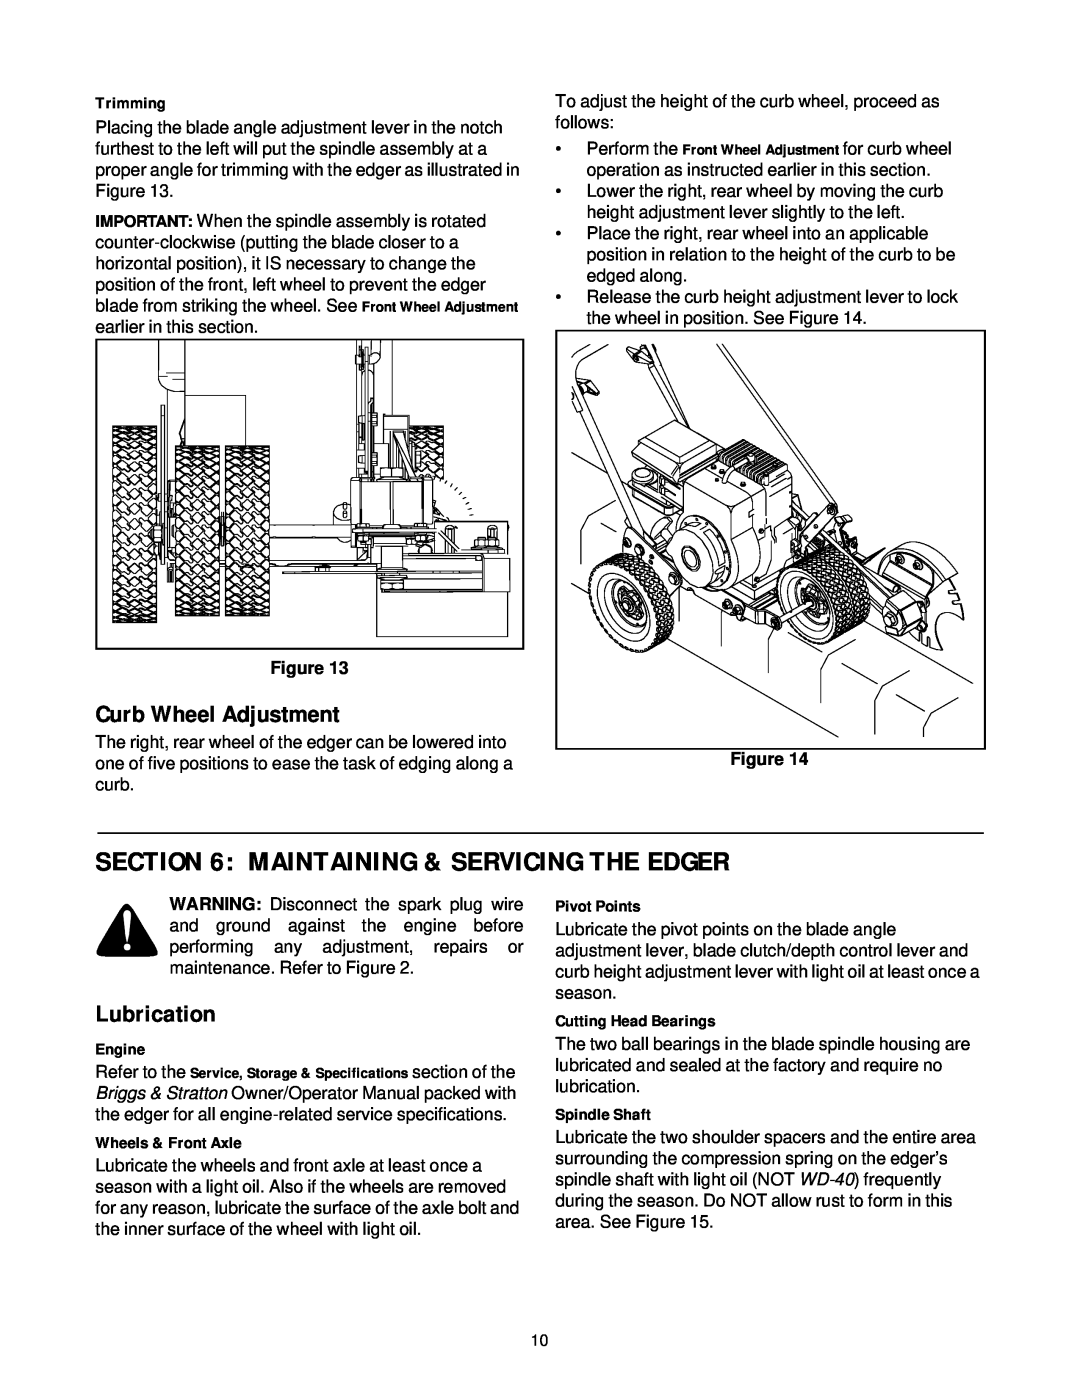 Briggs & Stratton 592 manual Maintaining & Servicing The Edger, Curb Wheel Adjustment, Lubrication, Trimming, Engine 